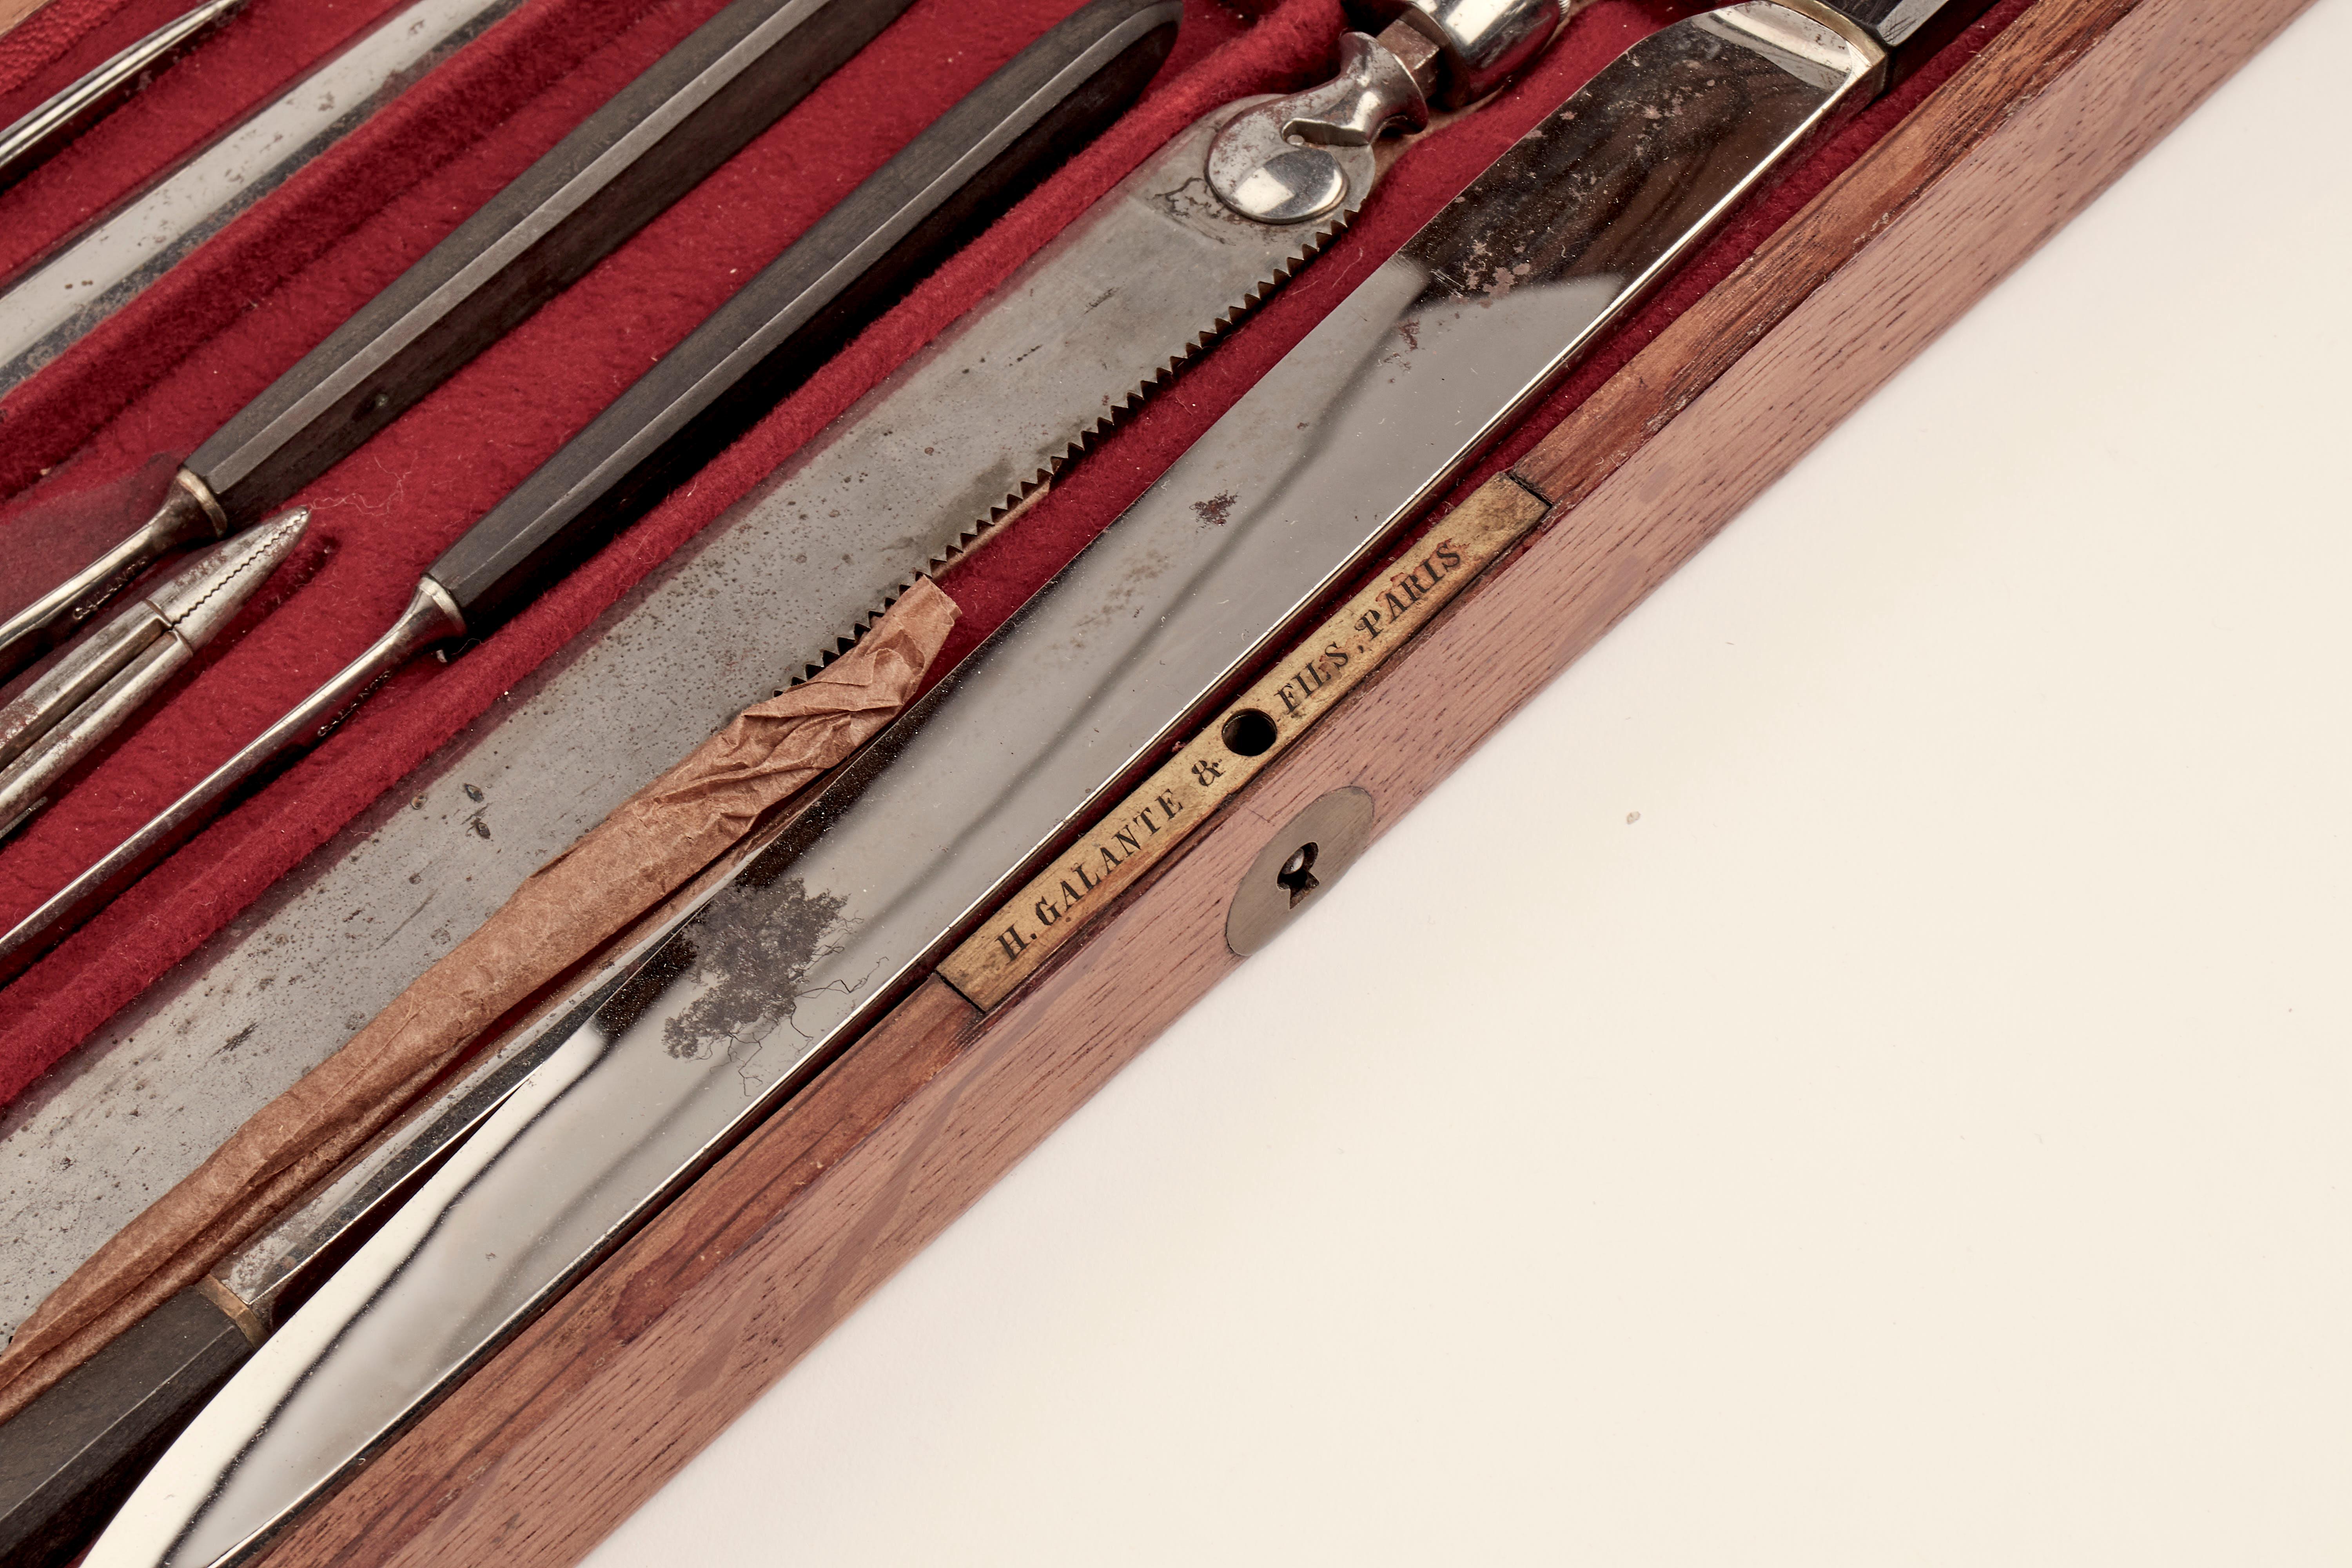 An oak wood case with a complete surgery set of 8 surgical instruments made on steel, with black horn handles and rosewood, signed H. Galante & fils. Paris, France 1870 ca.